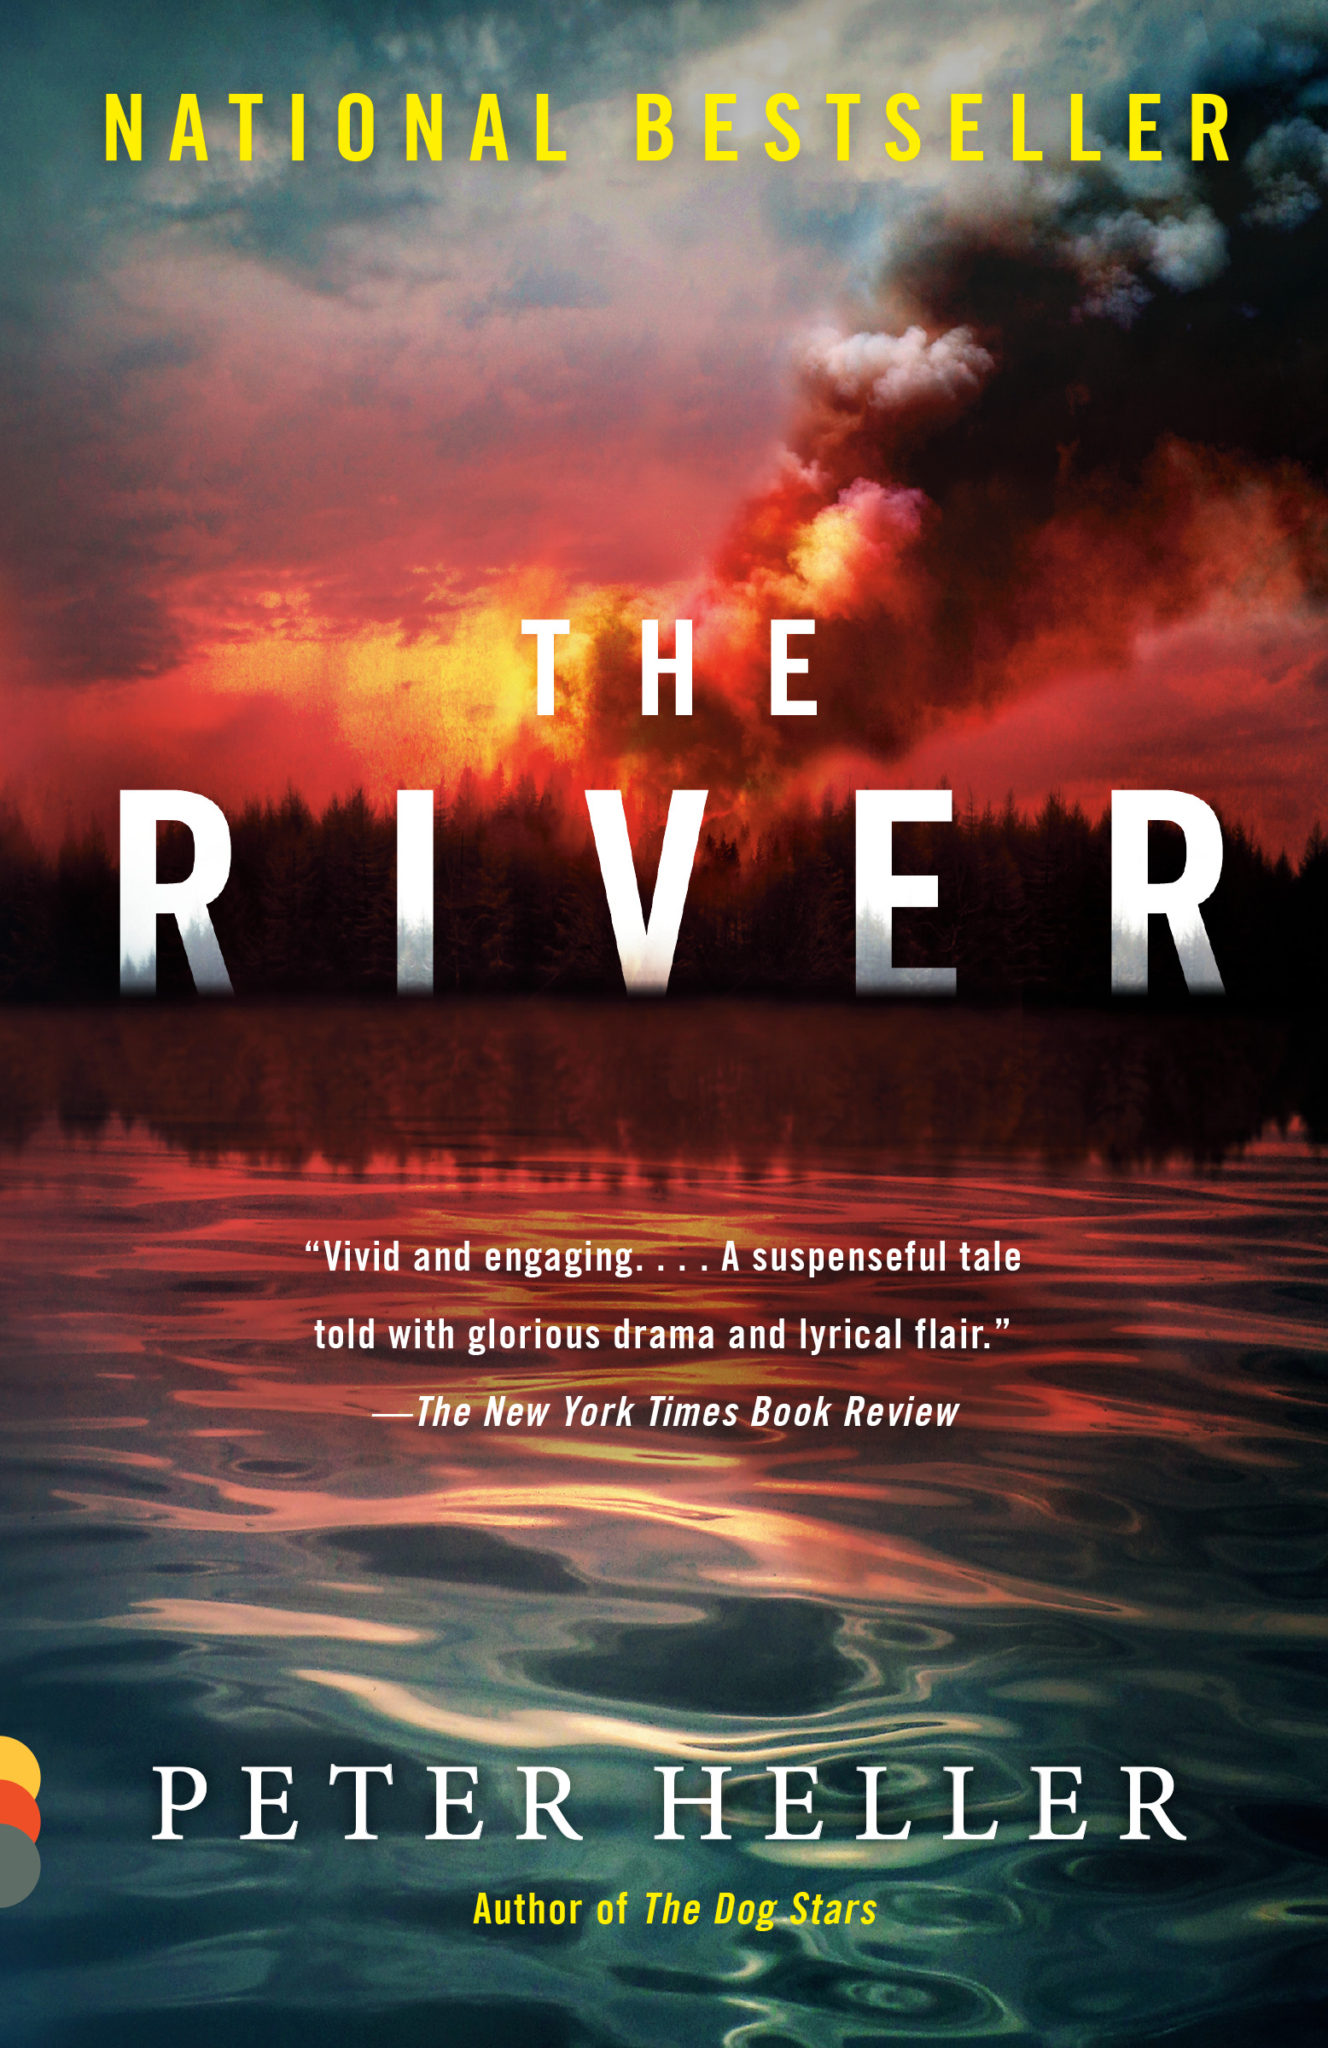 book the river by peter heller